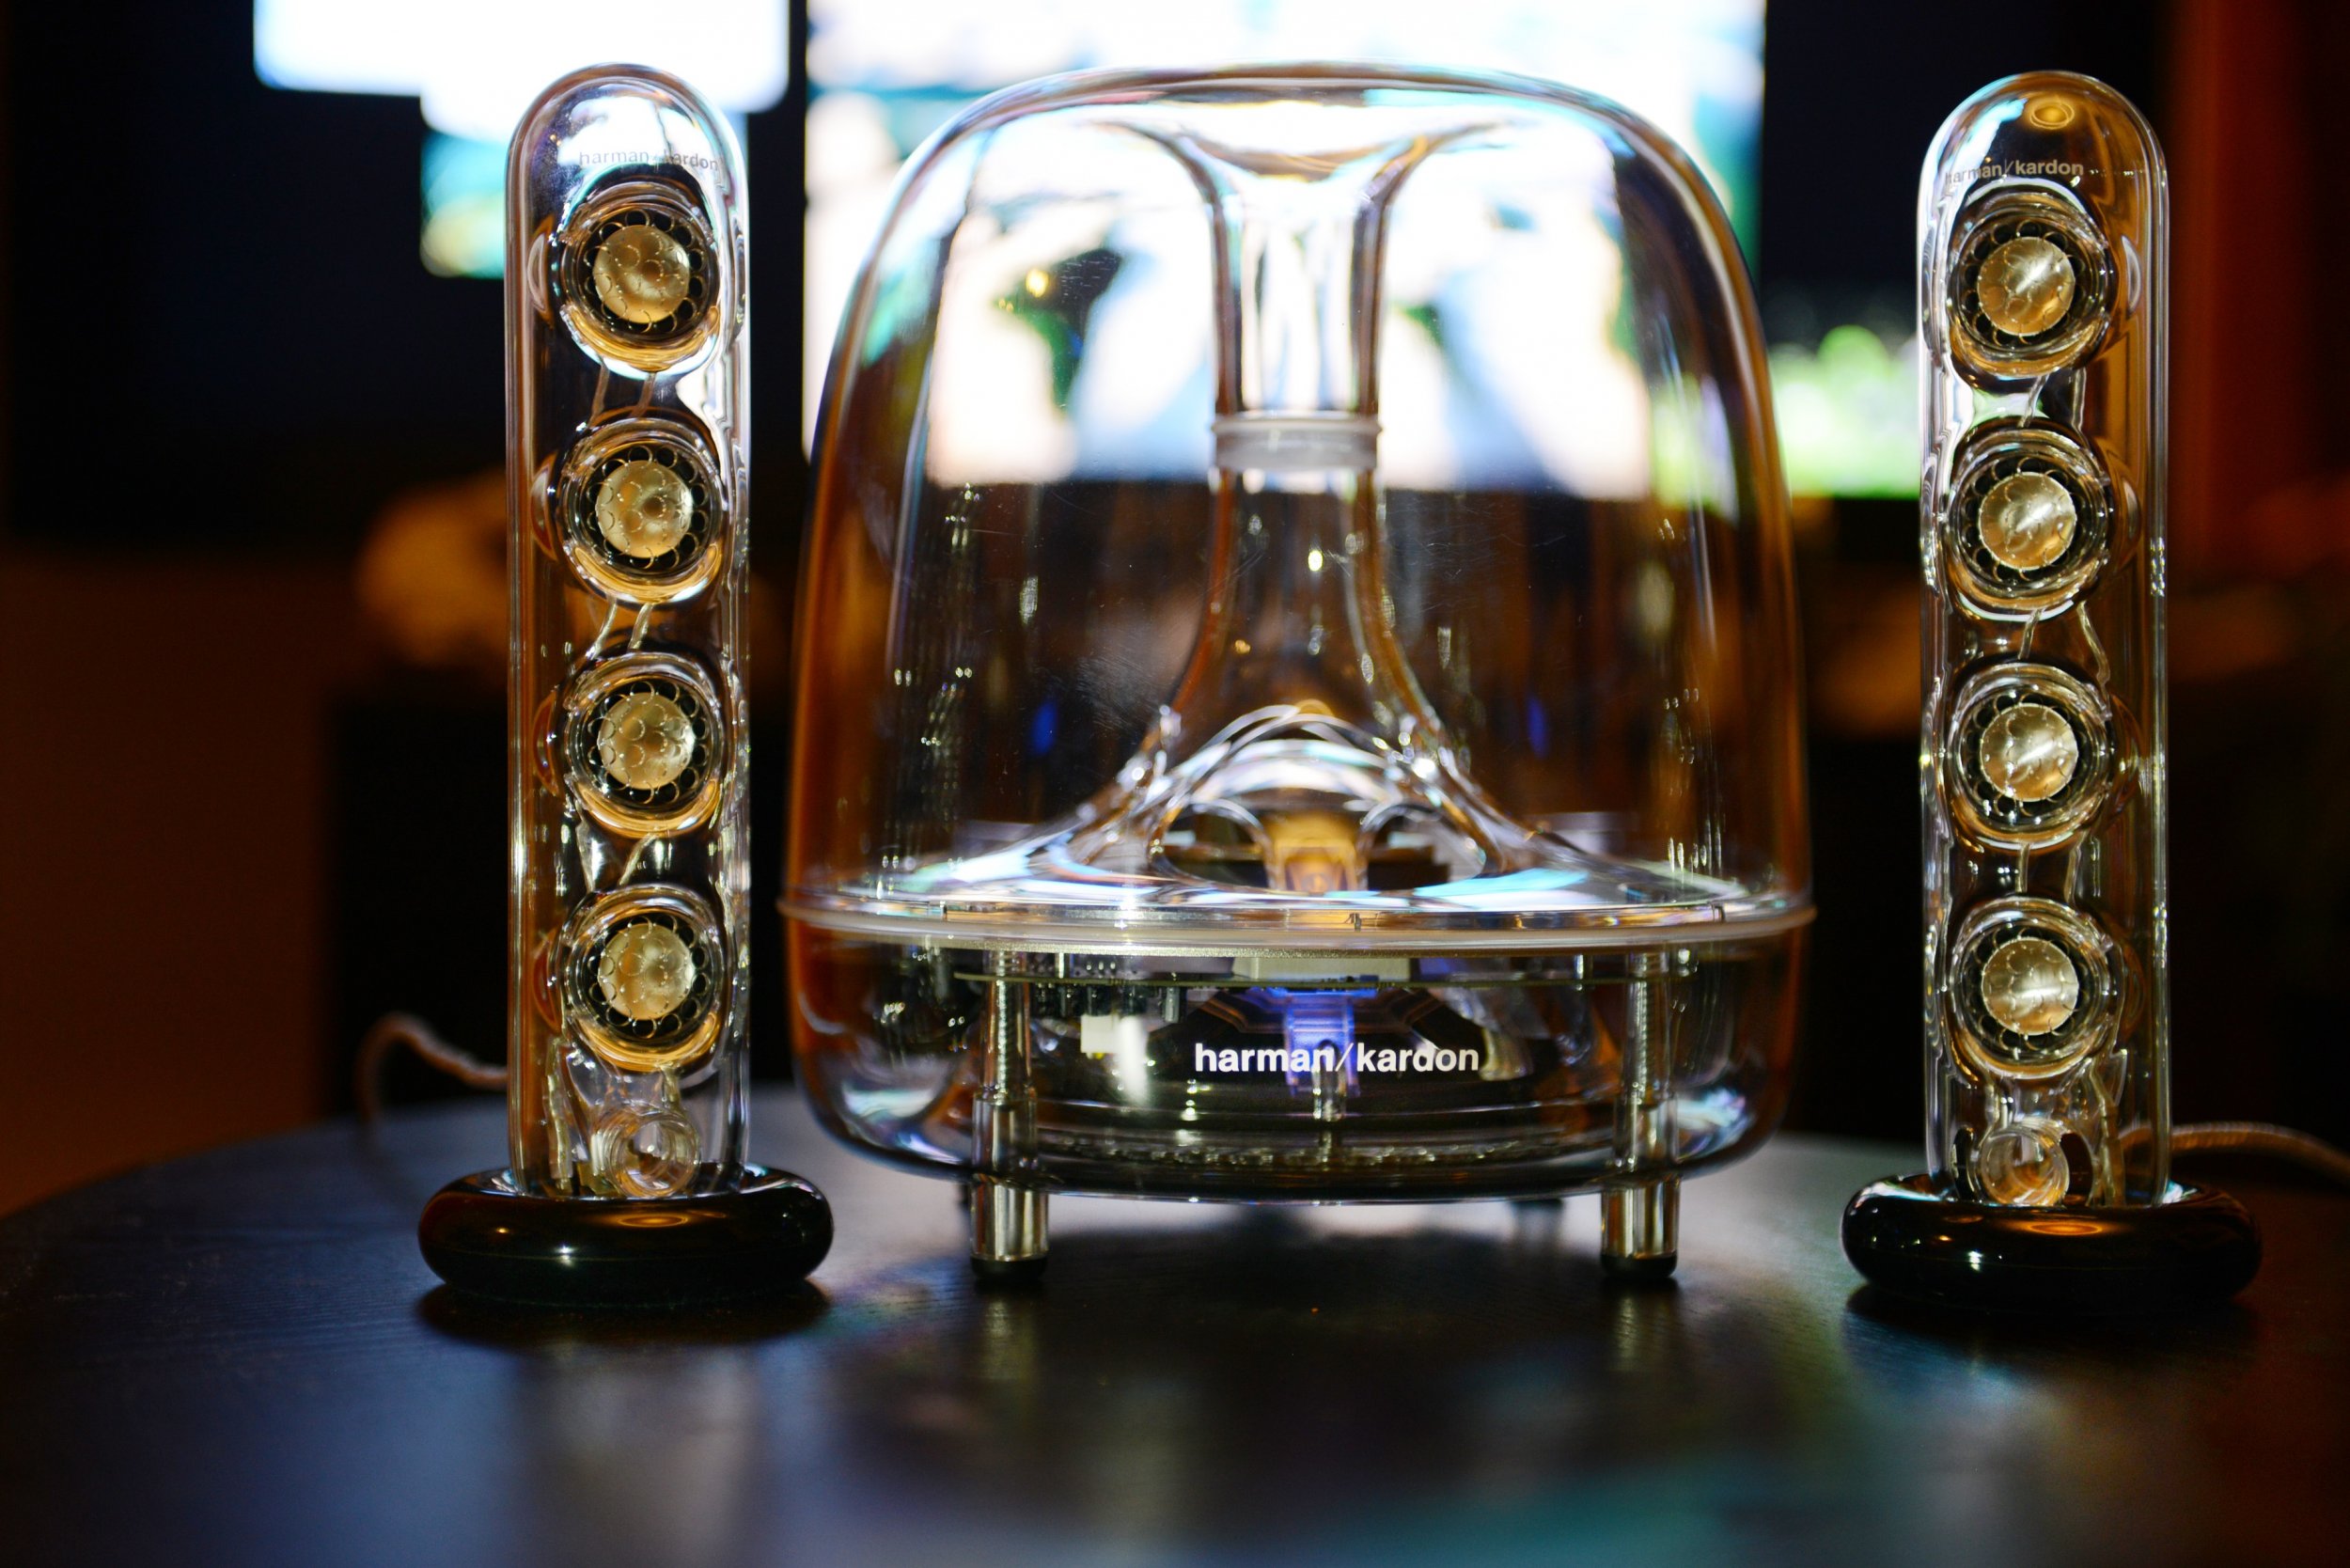 SoundSticks Wireless Review: The 'Apple iSub' Is As Elegant